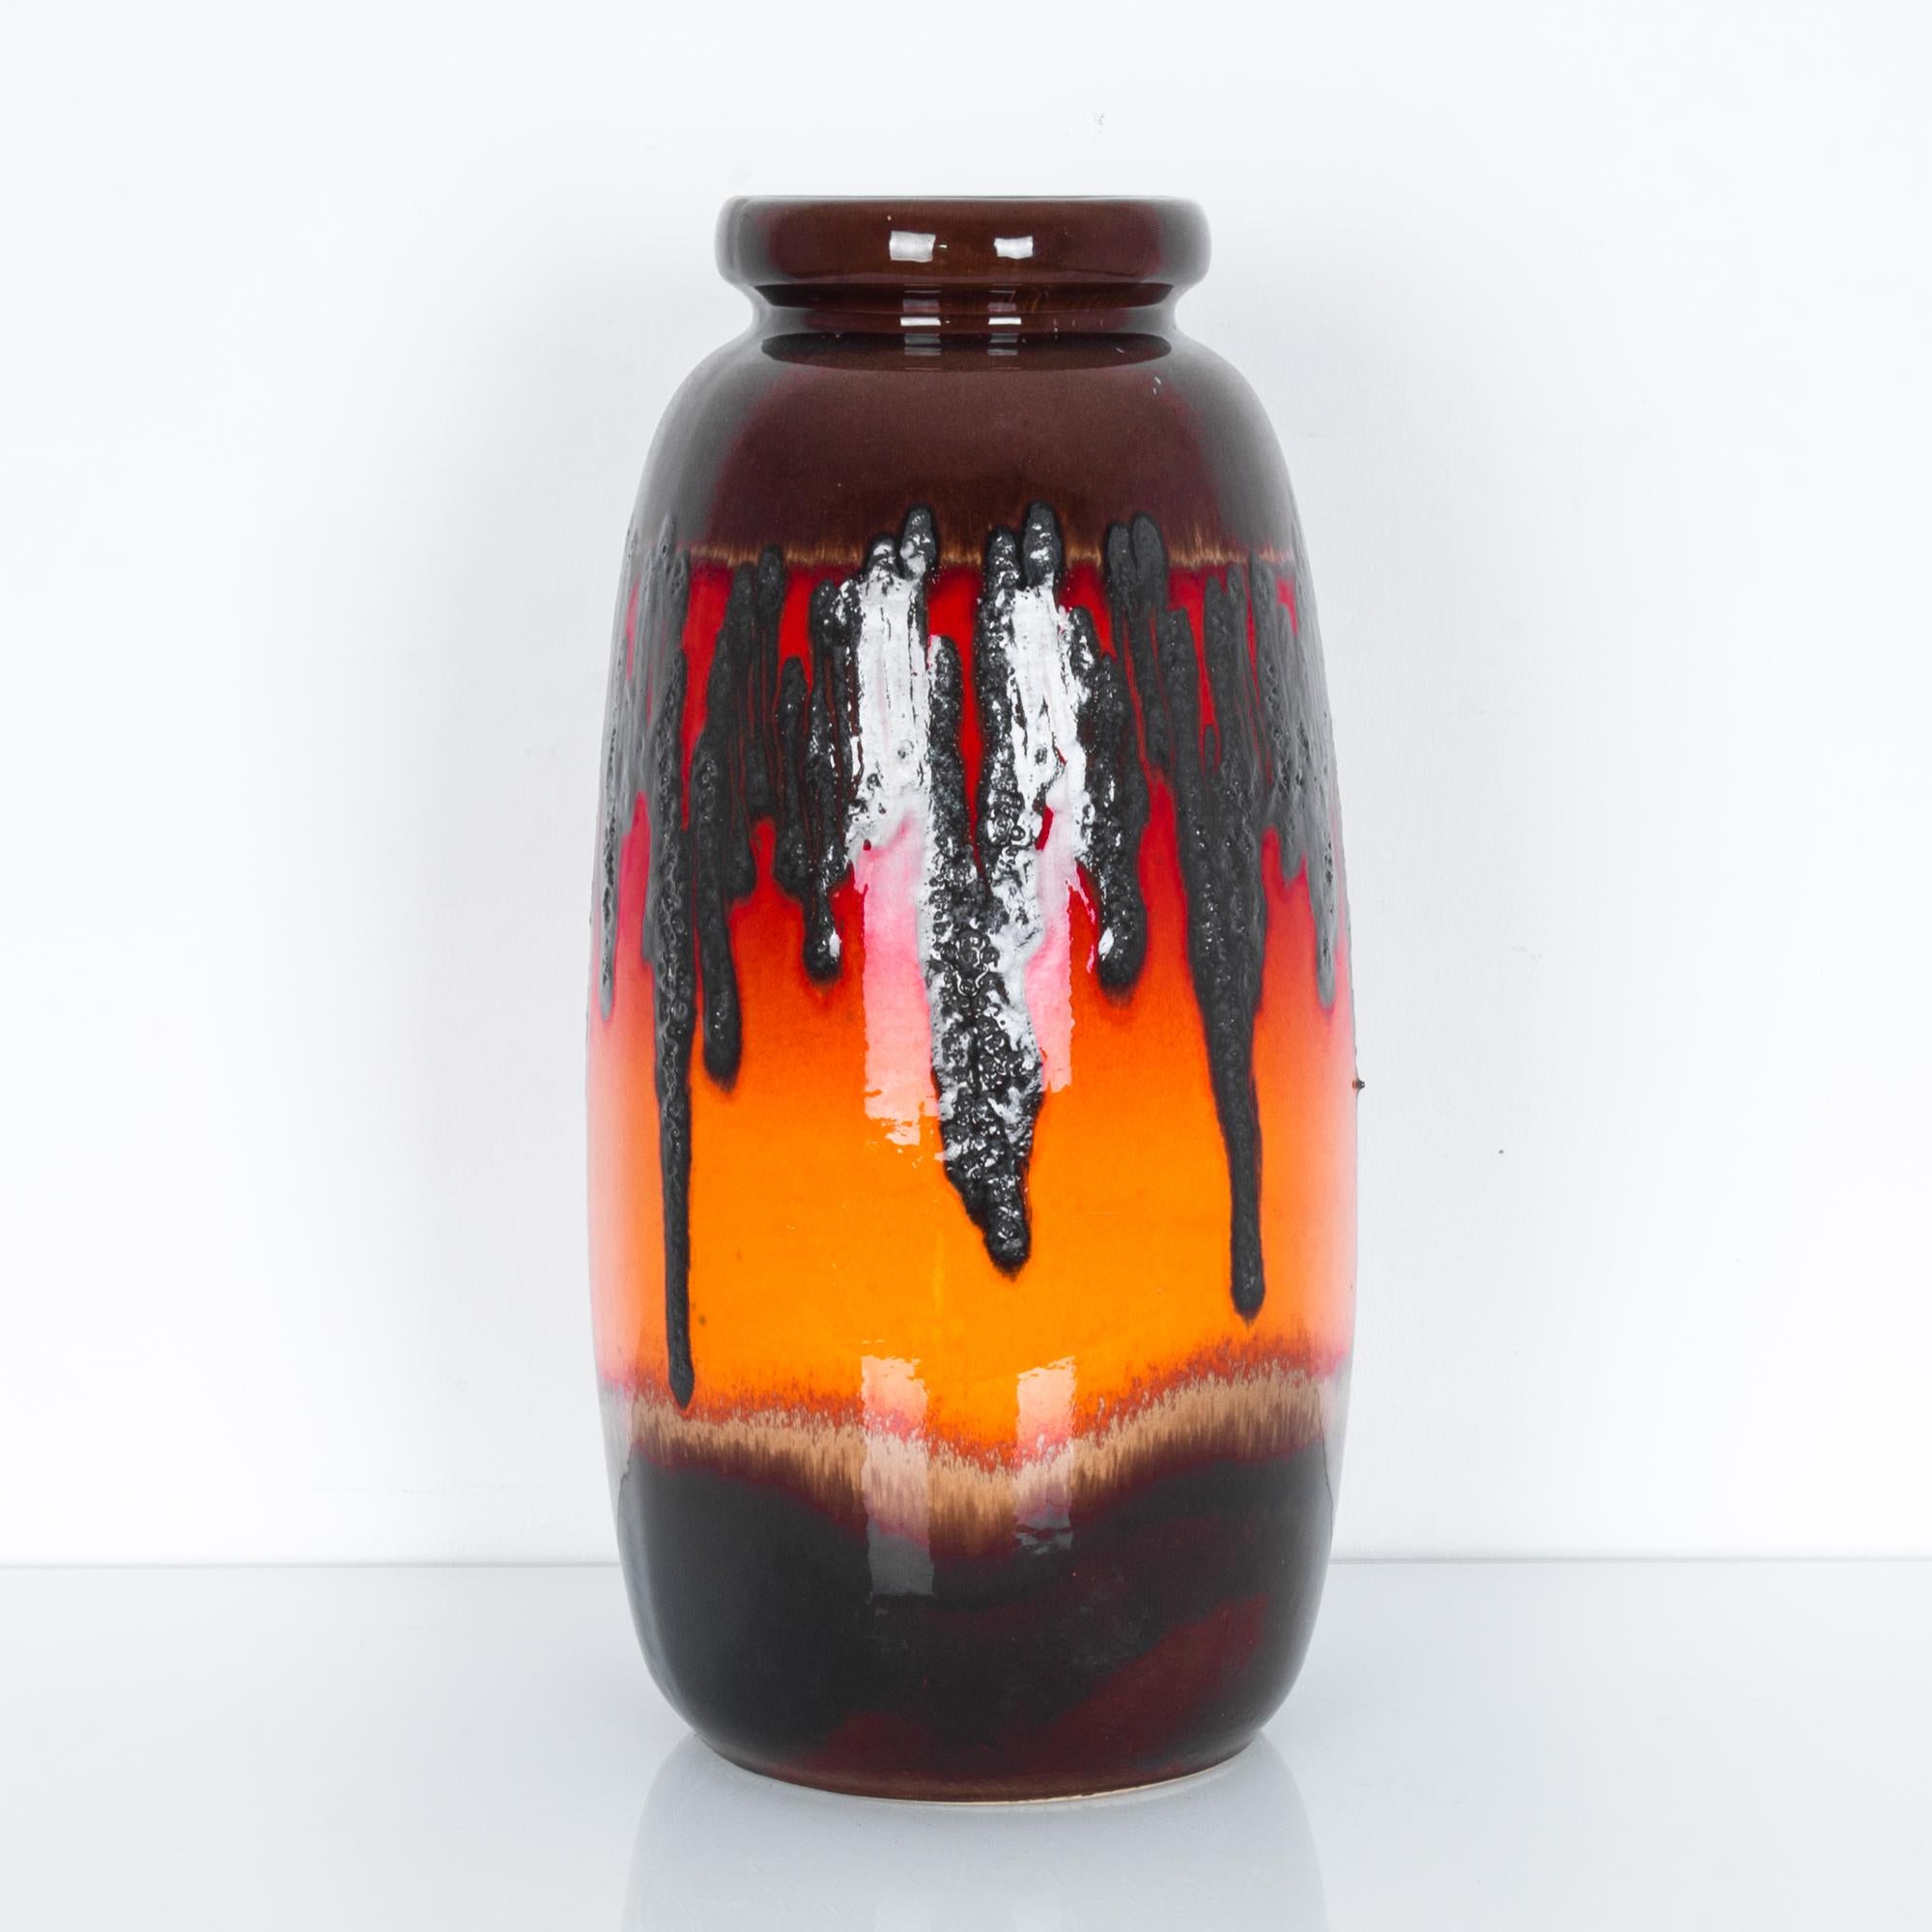 A ceramic vase from West Germany, circa 1950. An elegant and simple form allows the bold color composition to shine. A rich brown melds into striking oranges and reds, scored through with an abstract graphic scribble. Modernist and striking, yet